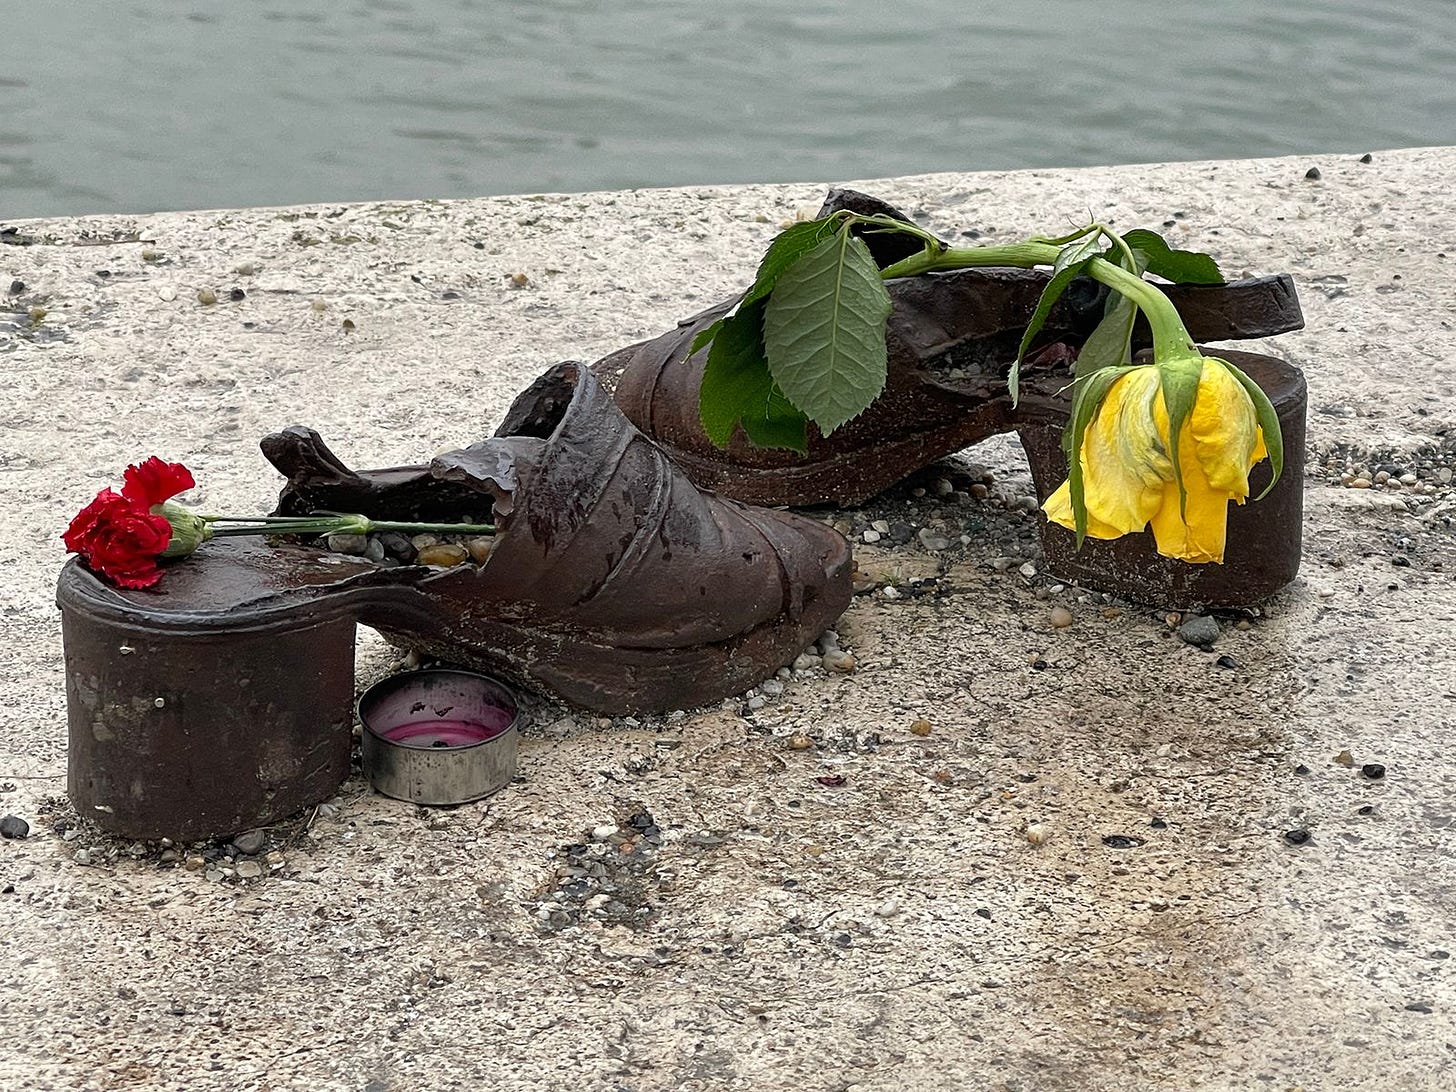 Bronze shoes on the Danube River bank to memorialize the victims who died at the hands of Arrow Cross fascists. (Photo by Vivian Bercovici)